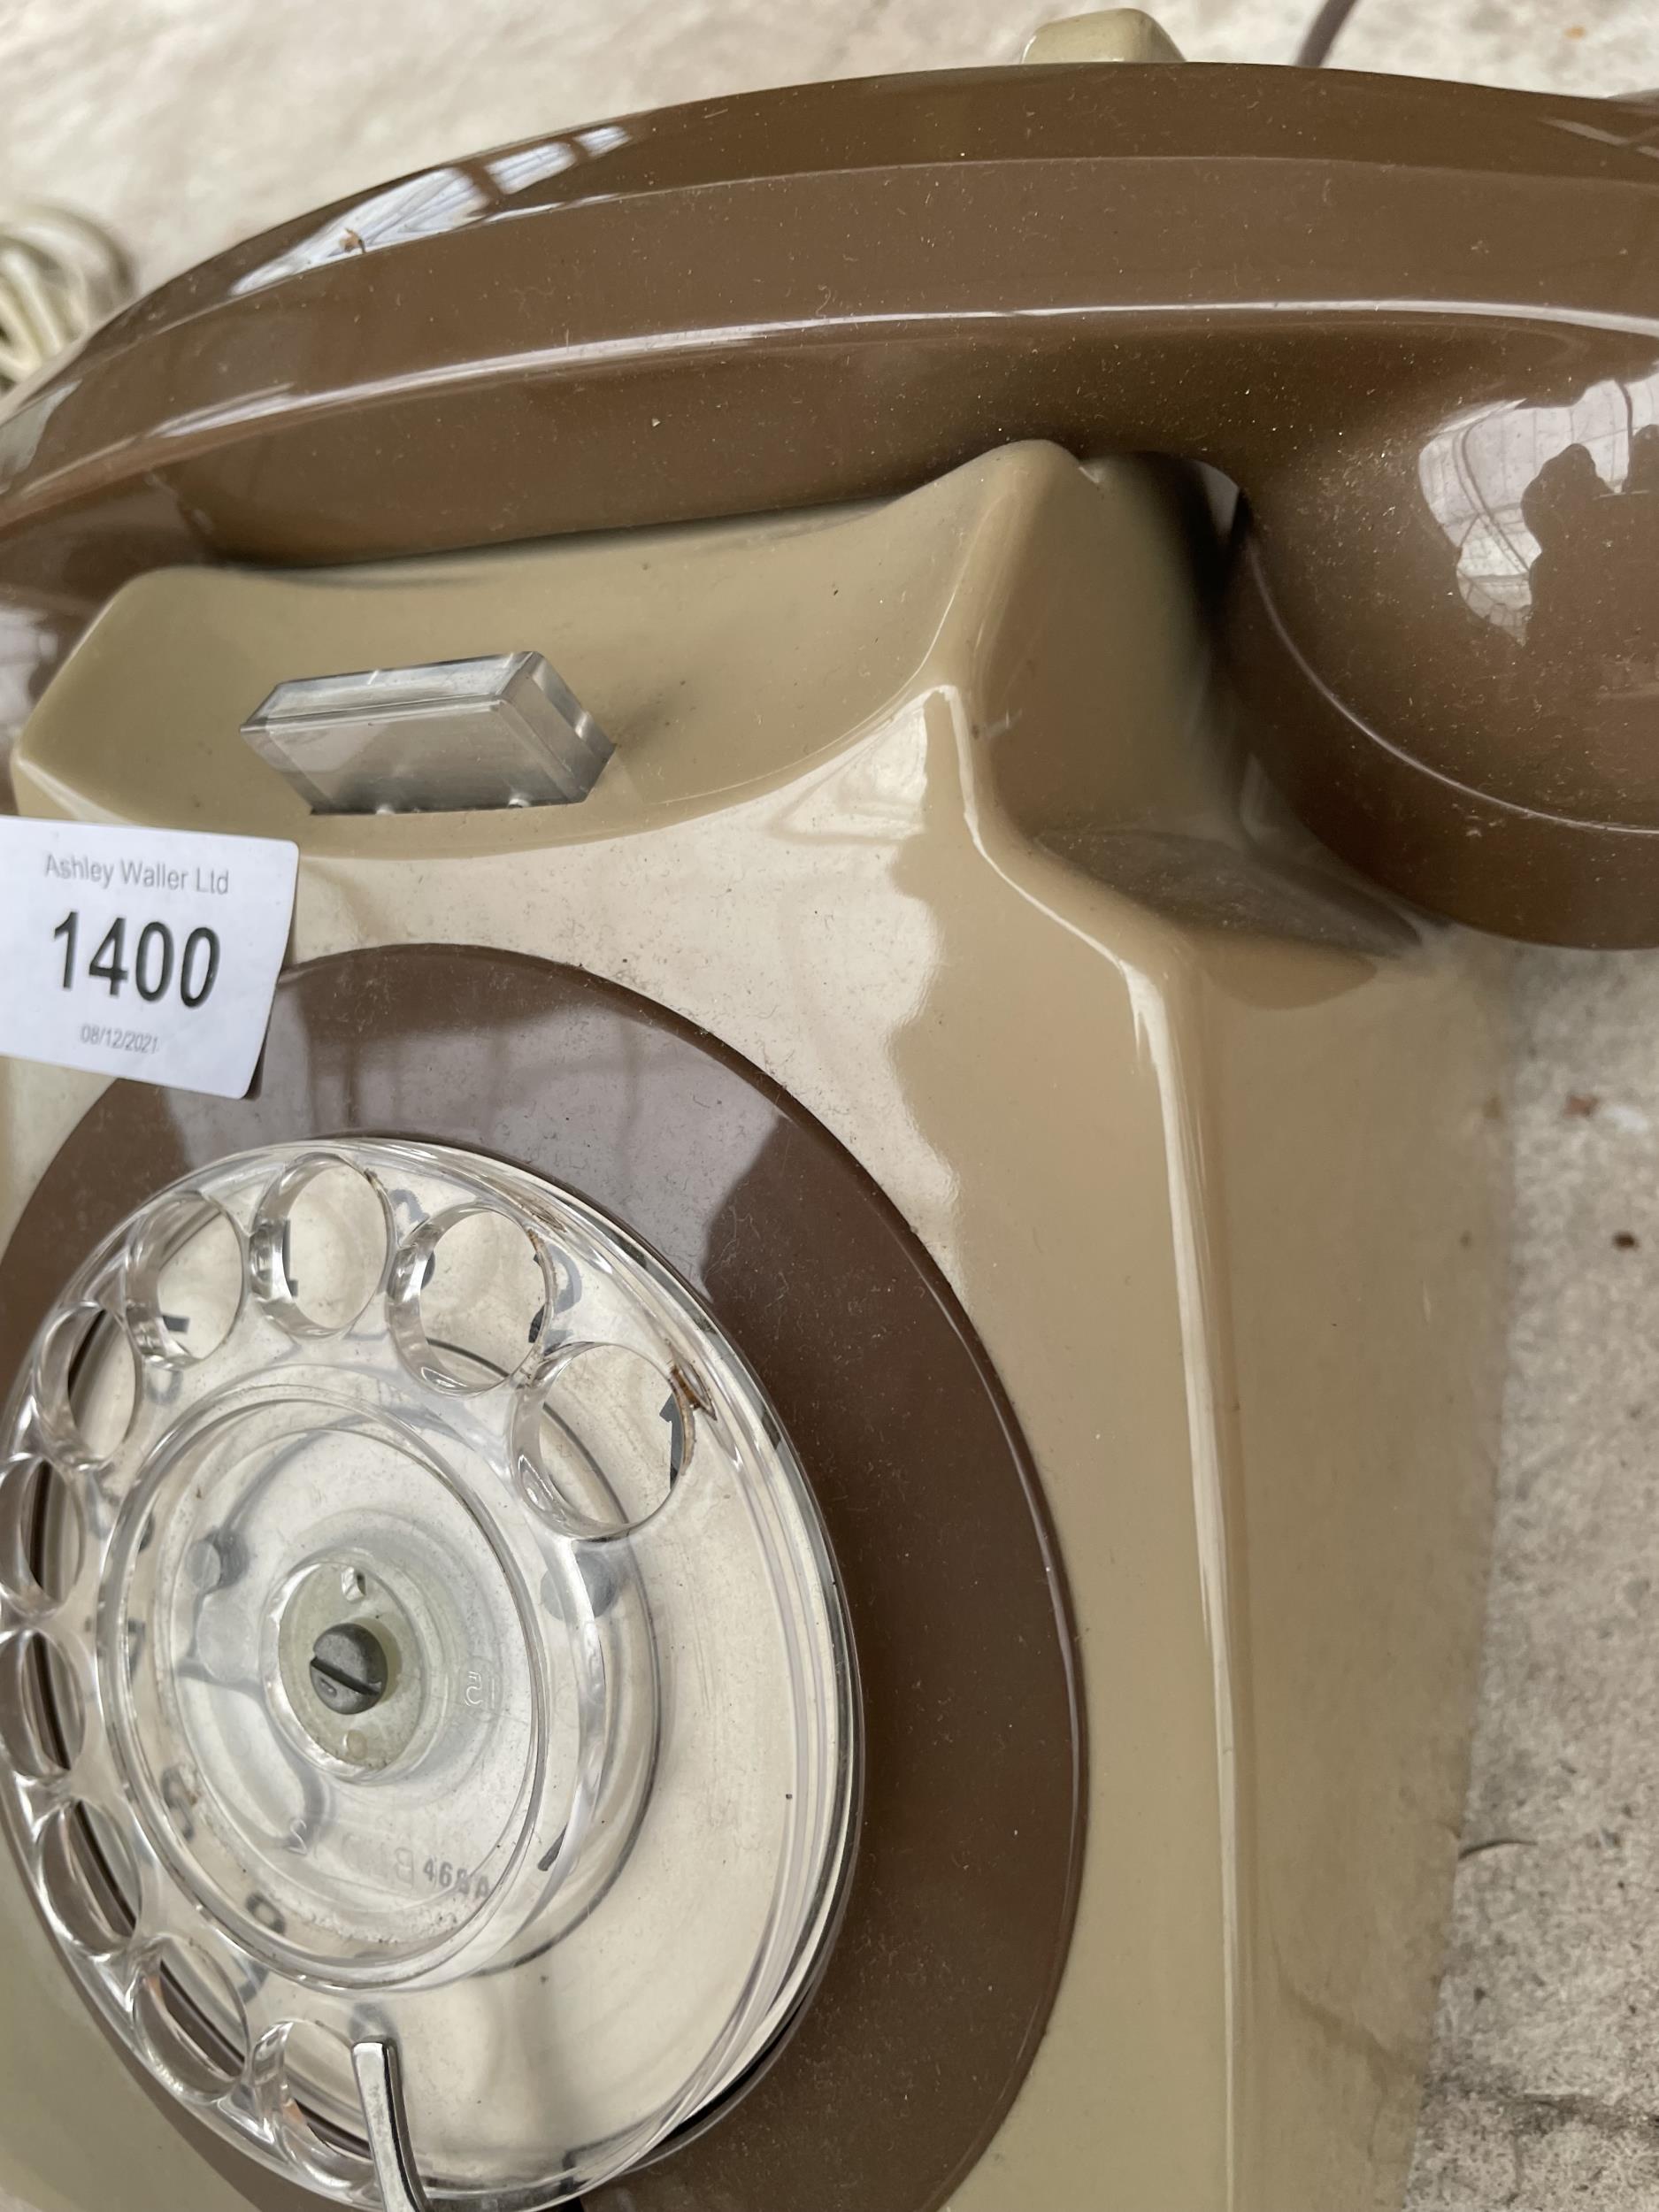 A RETRO BROWN ROTARY DIAL TELEPHONE - Image 2 of 2